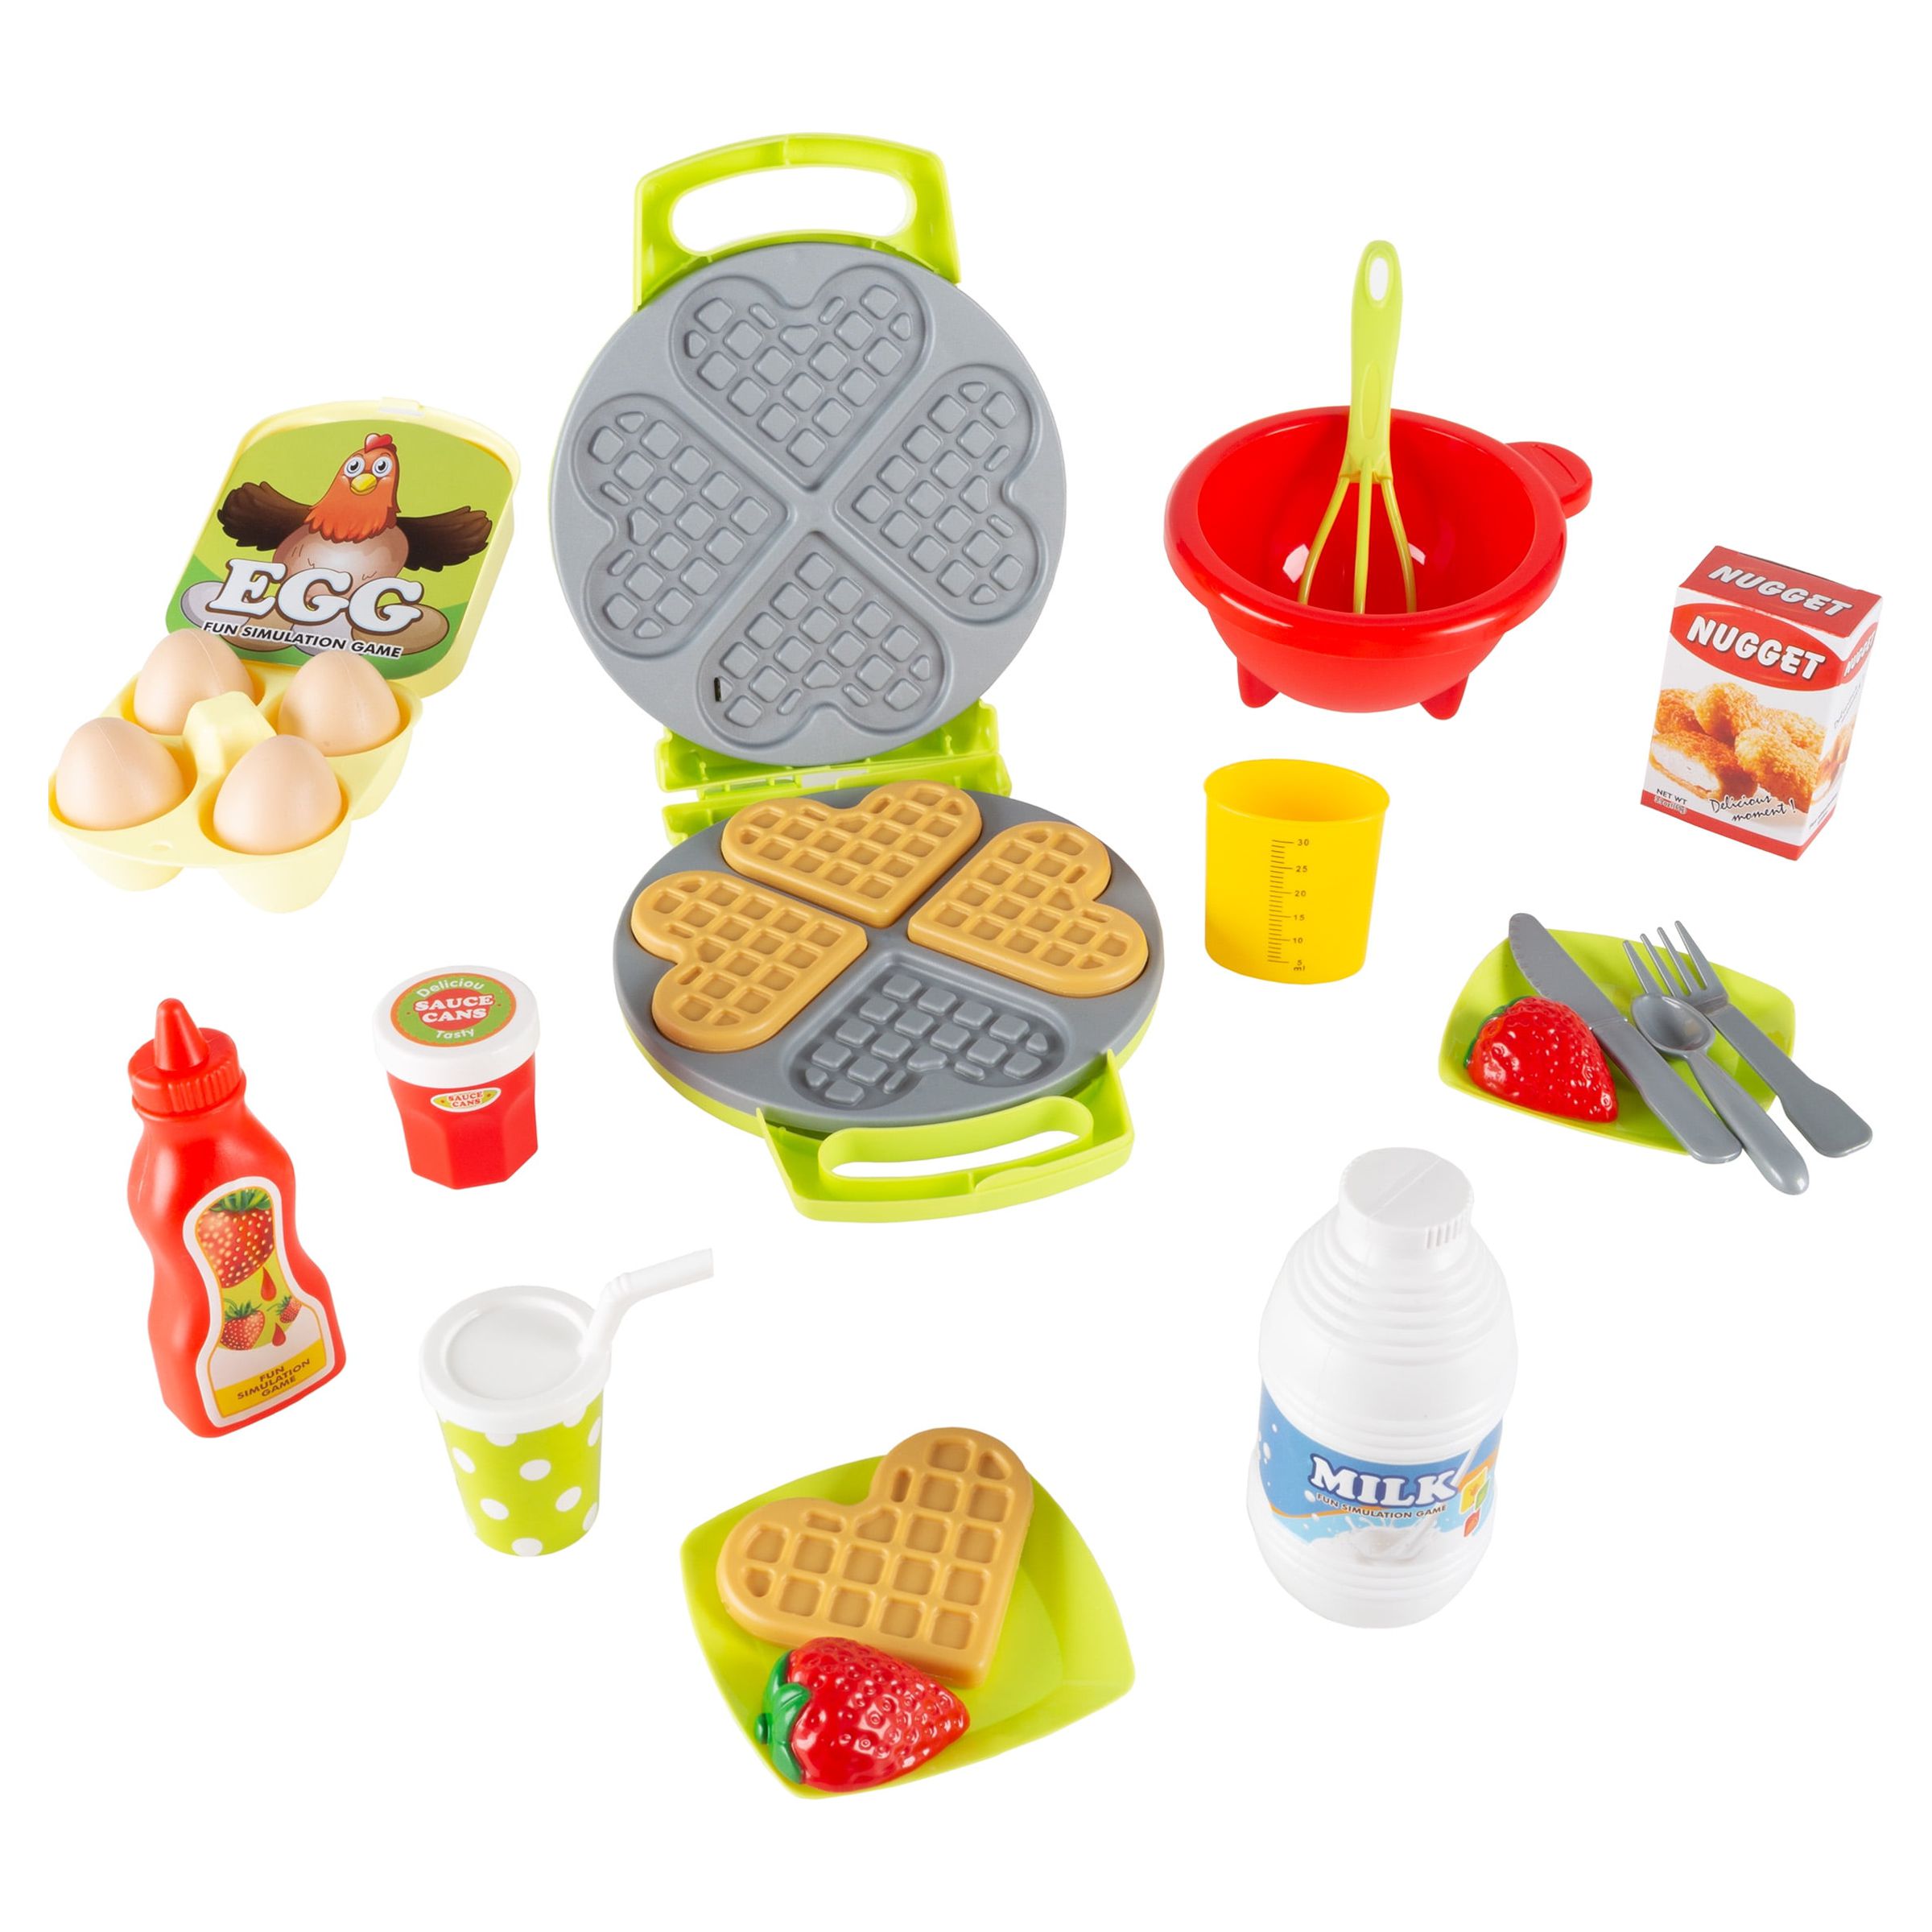 Kids Toy Waffle Iron Set with Music and Lights - Fun Pretend Play Waffle Making Kit by Hey! Play! - image 1 of 7